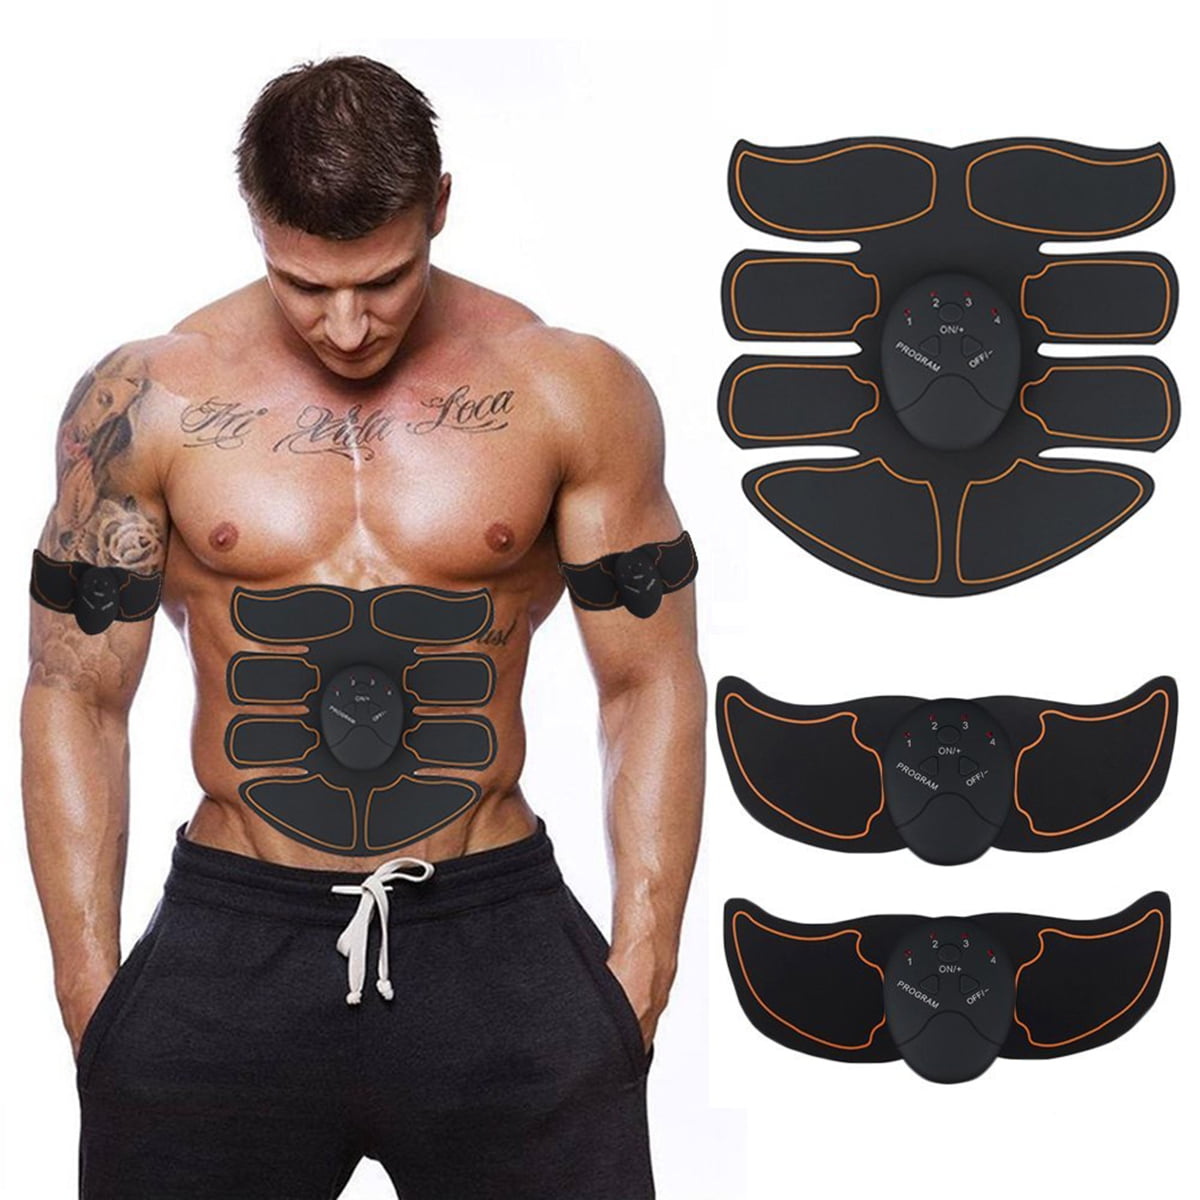 Details about   Home Abdominal Trainer Ultimate Muscle EMS AB & Arms Simulator ABS Training Set 